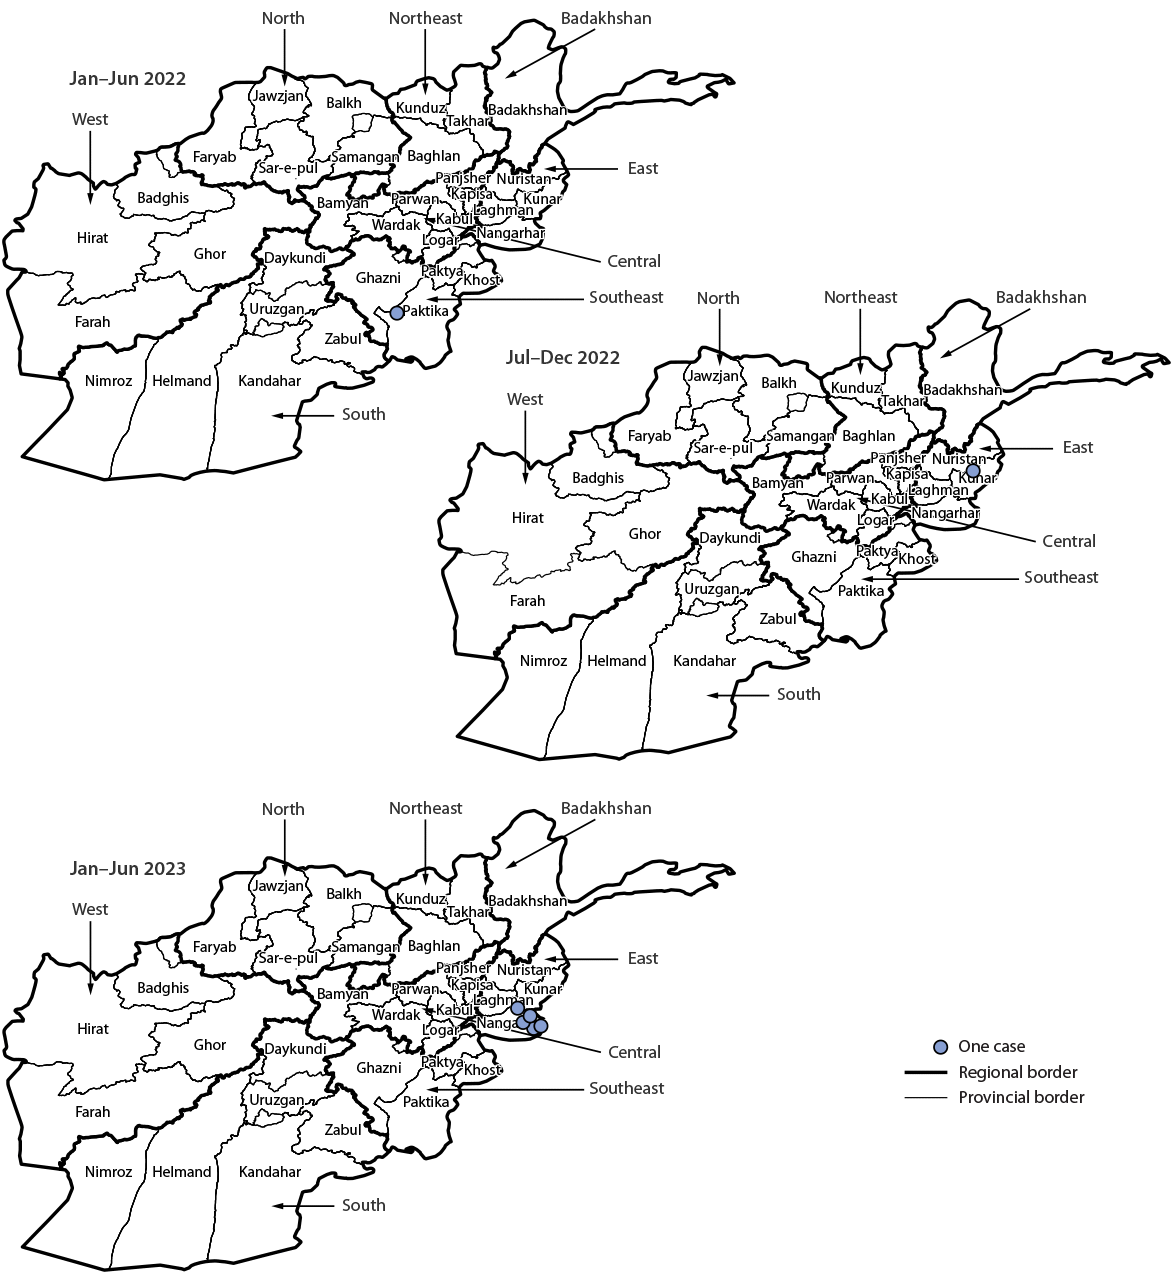 The figure consists of three maps of Afghanistan, by region and province, which show the reported cases of polio caused by wild poliovirus type 1 (N = 7), by province and period in Afghanistan during January 2022–June 2023.